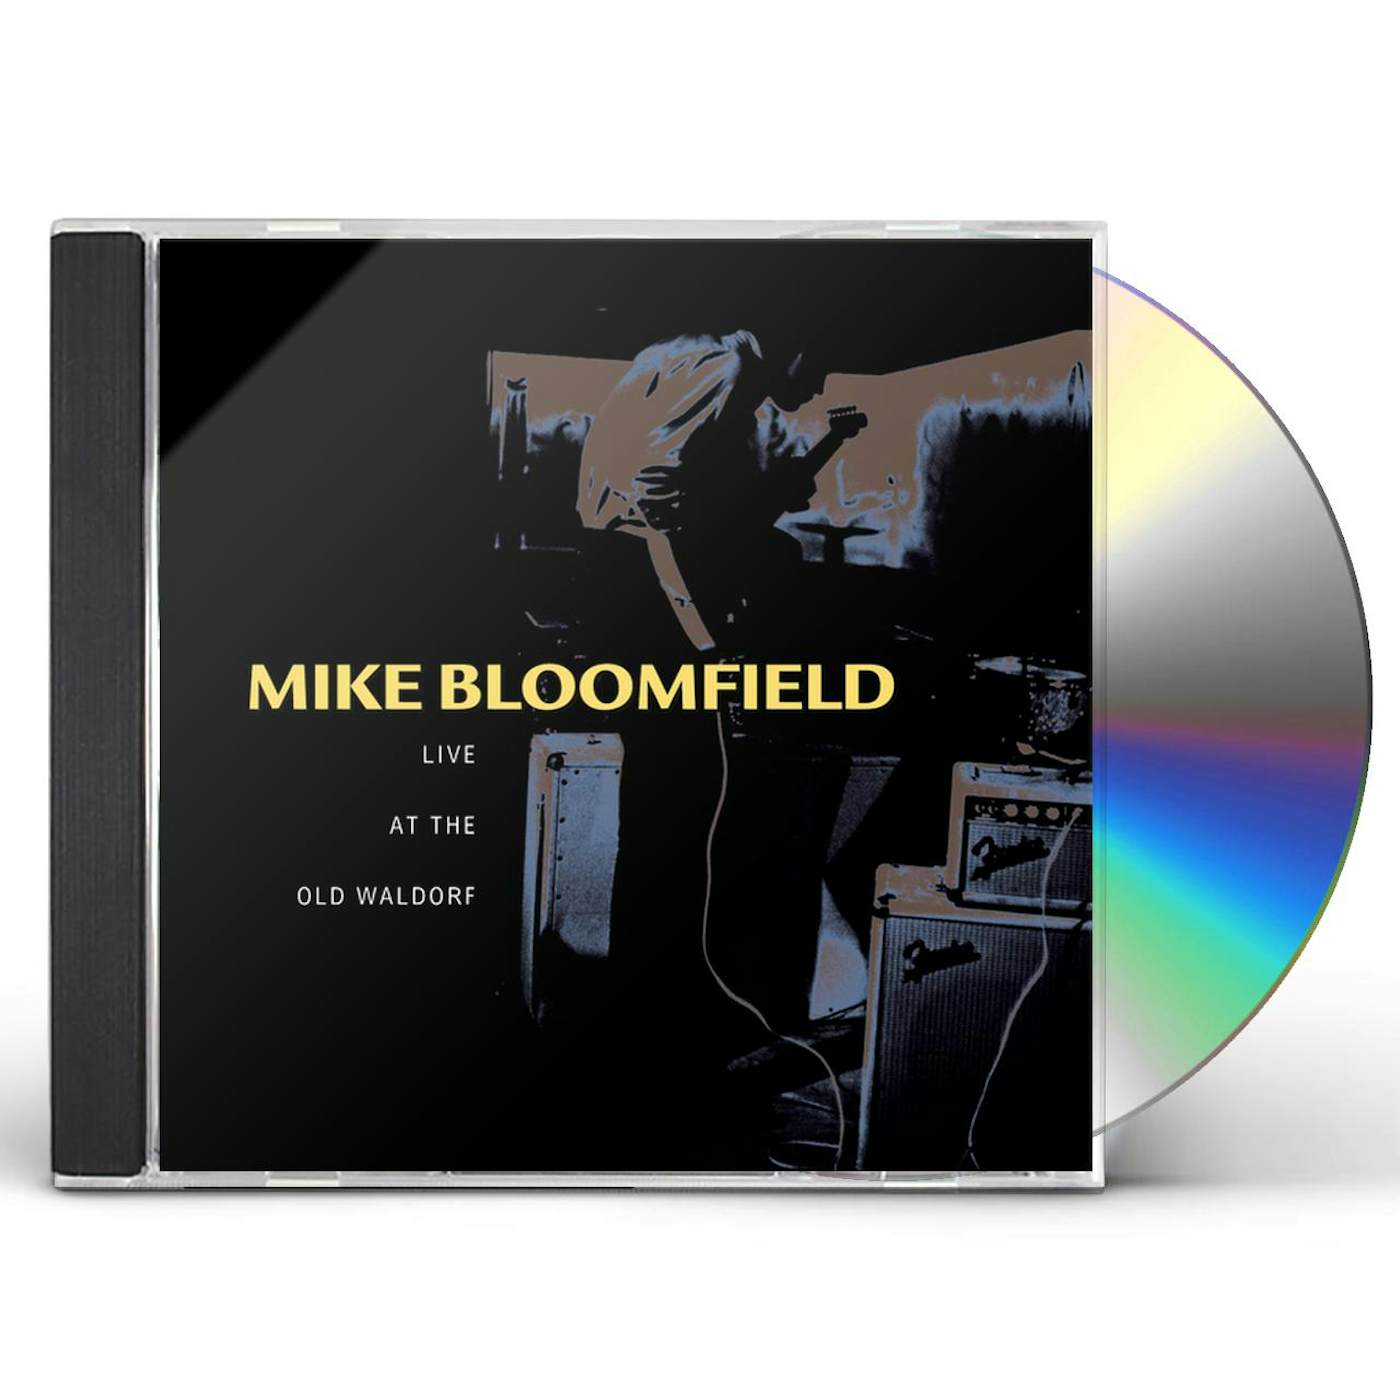 Mike Bloomfield LIVE AT THE OLD WALDORF CD